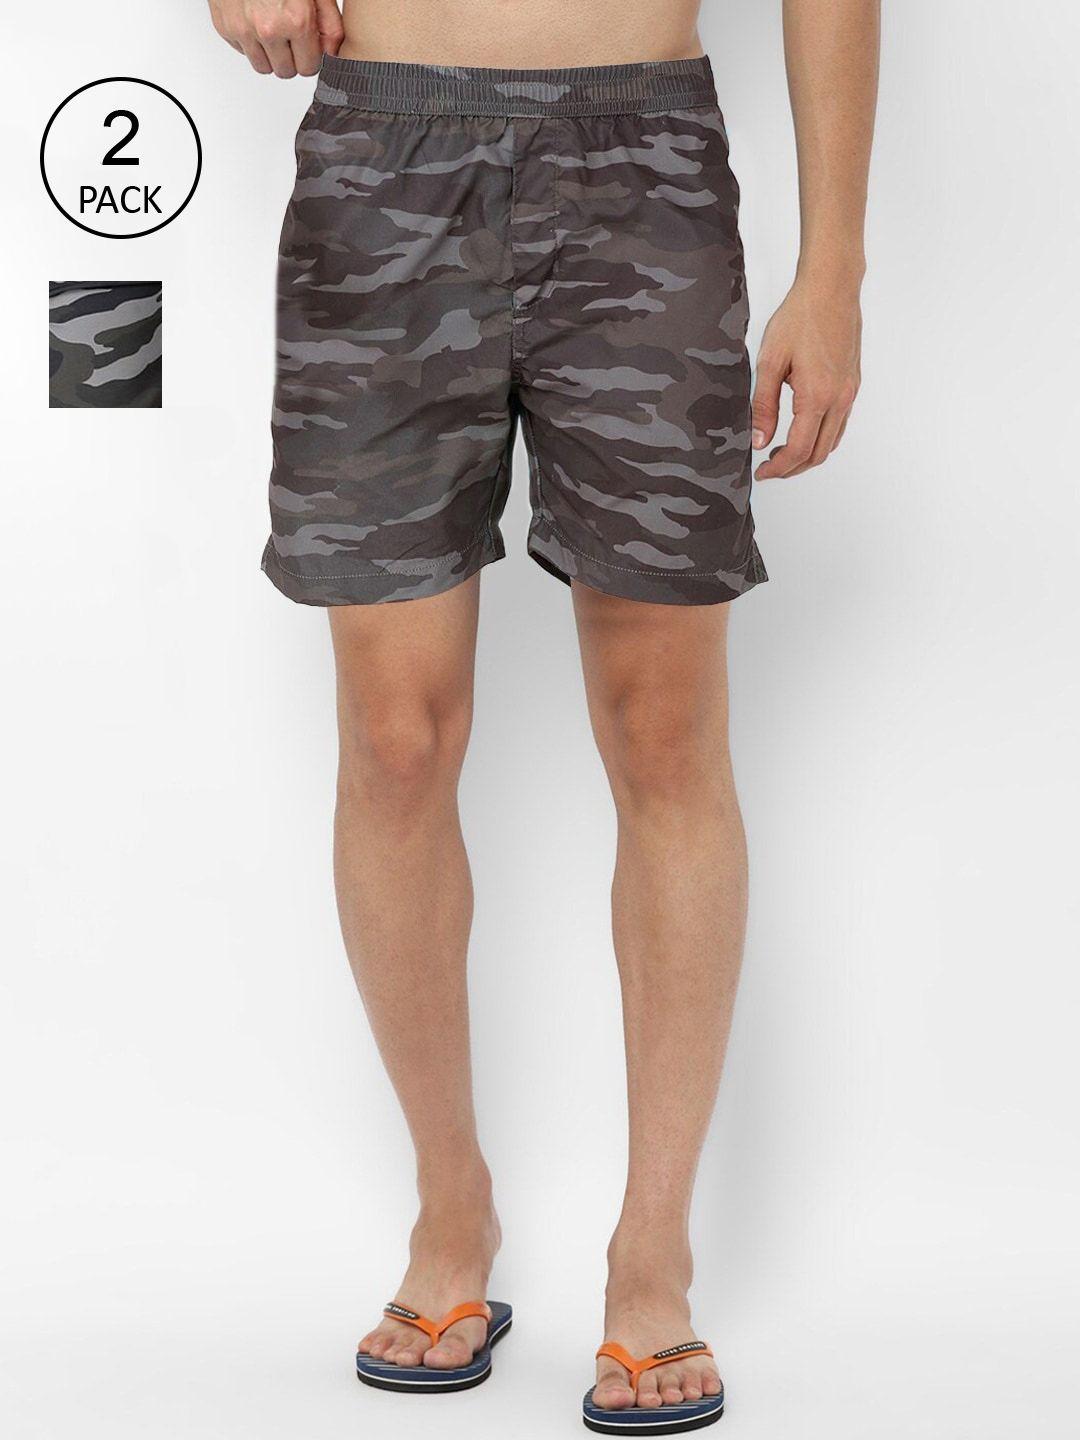 skidlers men pack of 2 brown & grey camouflage printed pure cotton boxers